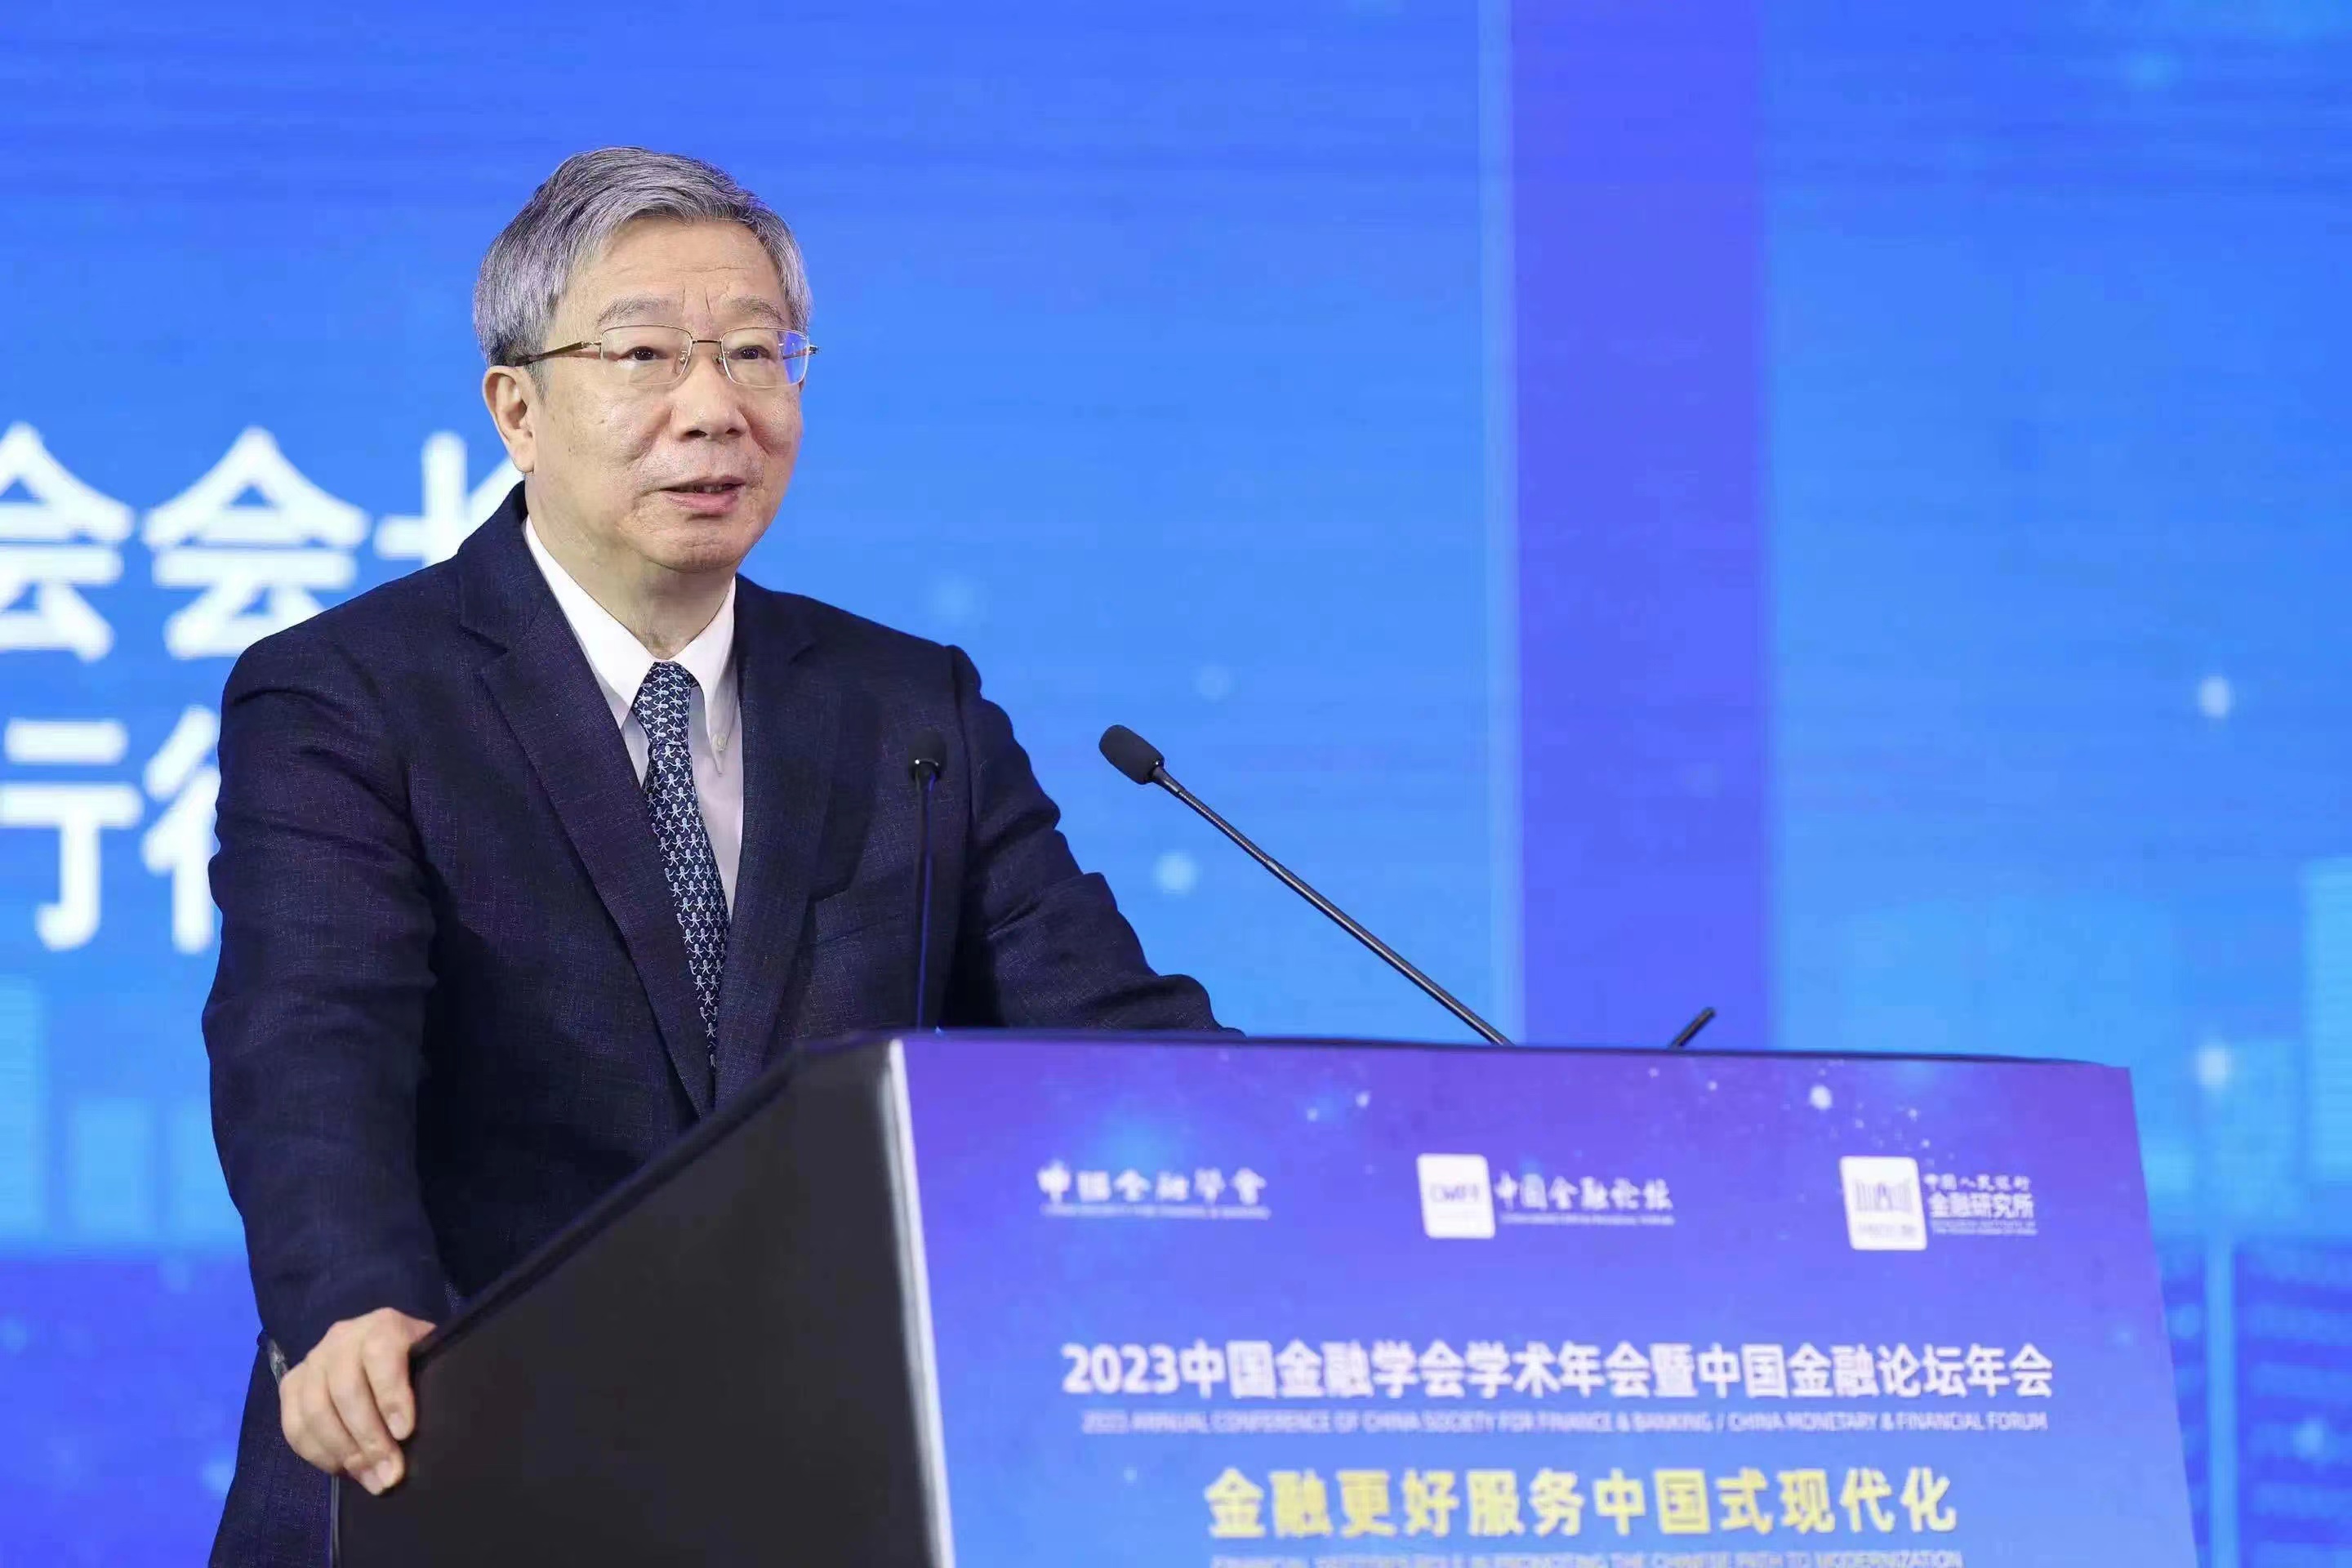 Yi Gang, governor of People's Bank of China (PBOC), attends the 2023 Annual Conference of China Society for Finance and Banking in Beijing, April 4, 2023. /PBOC